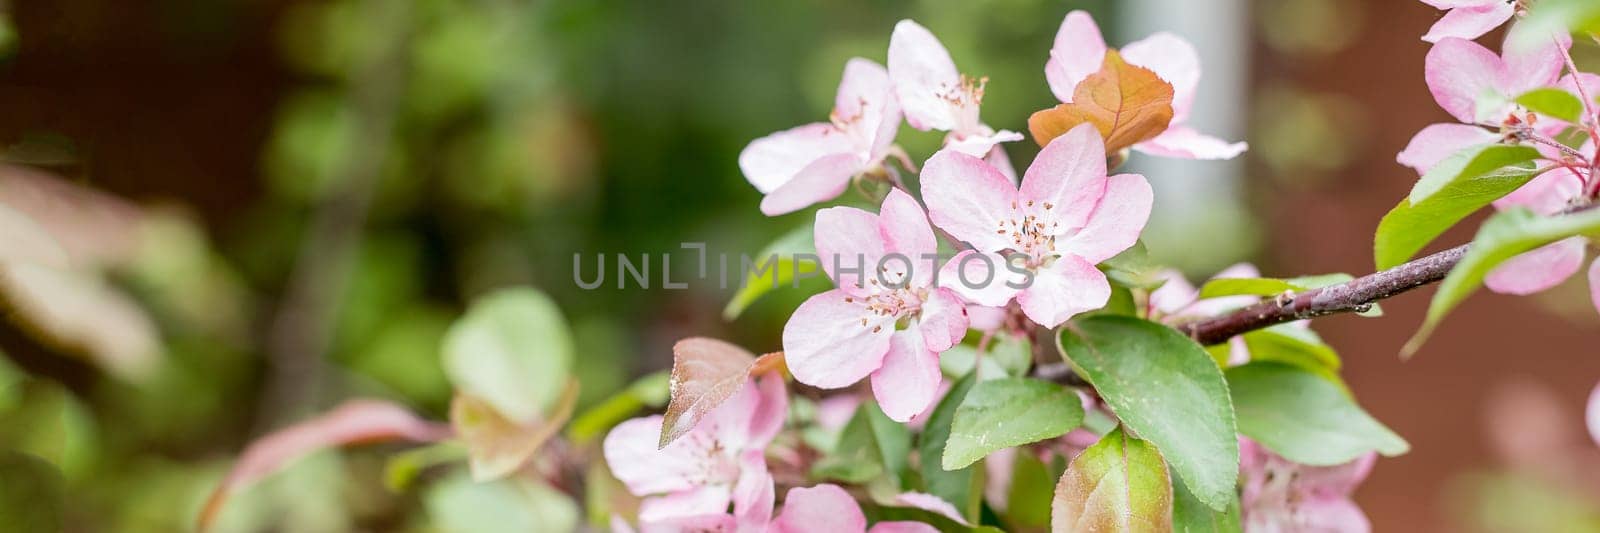 Spring background with white cherry plum blossoms in sunlight. Cherry plum blossoms